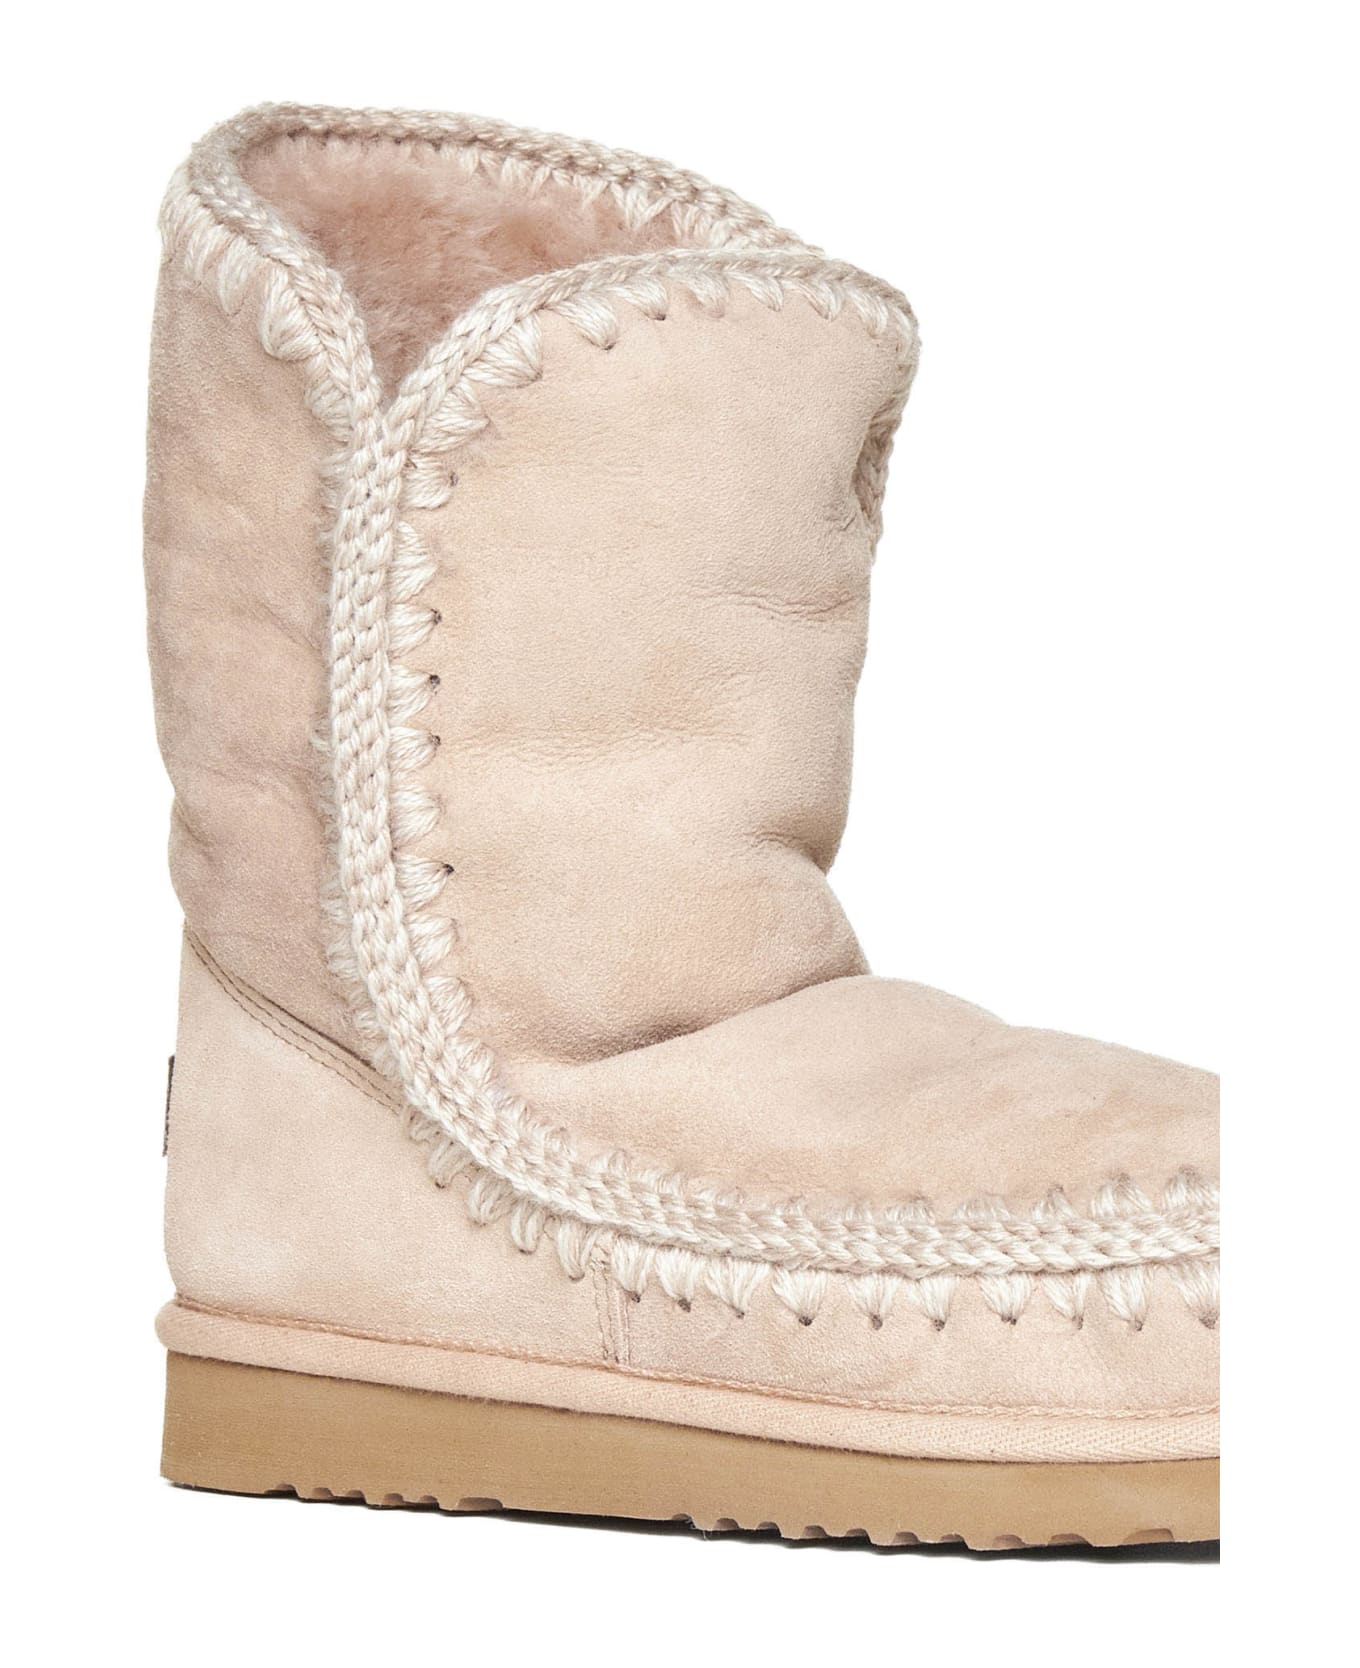 Mou Boots - Rose beige